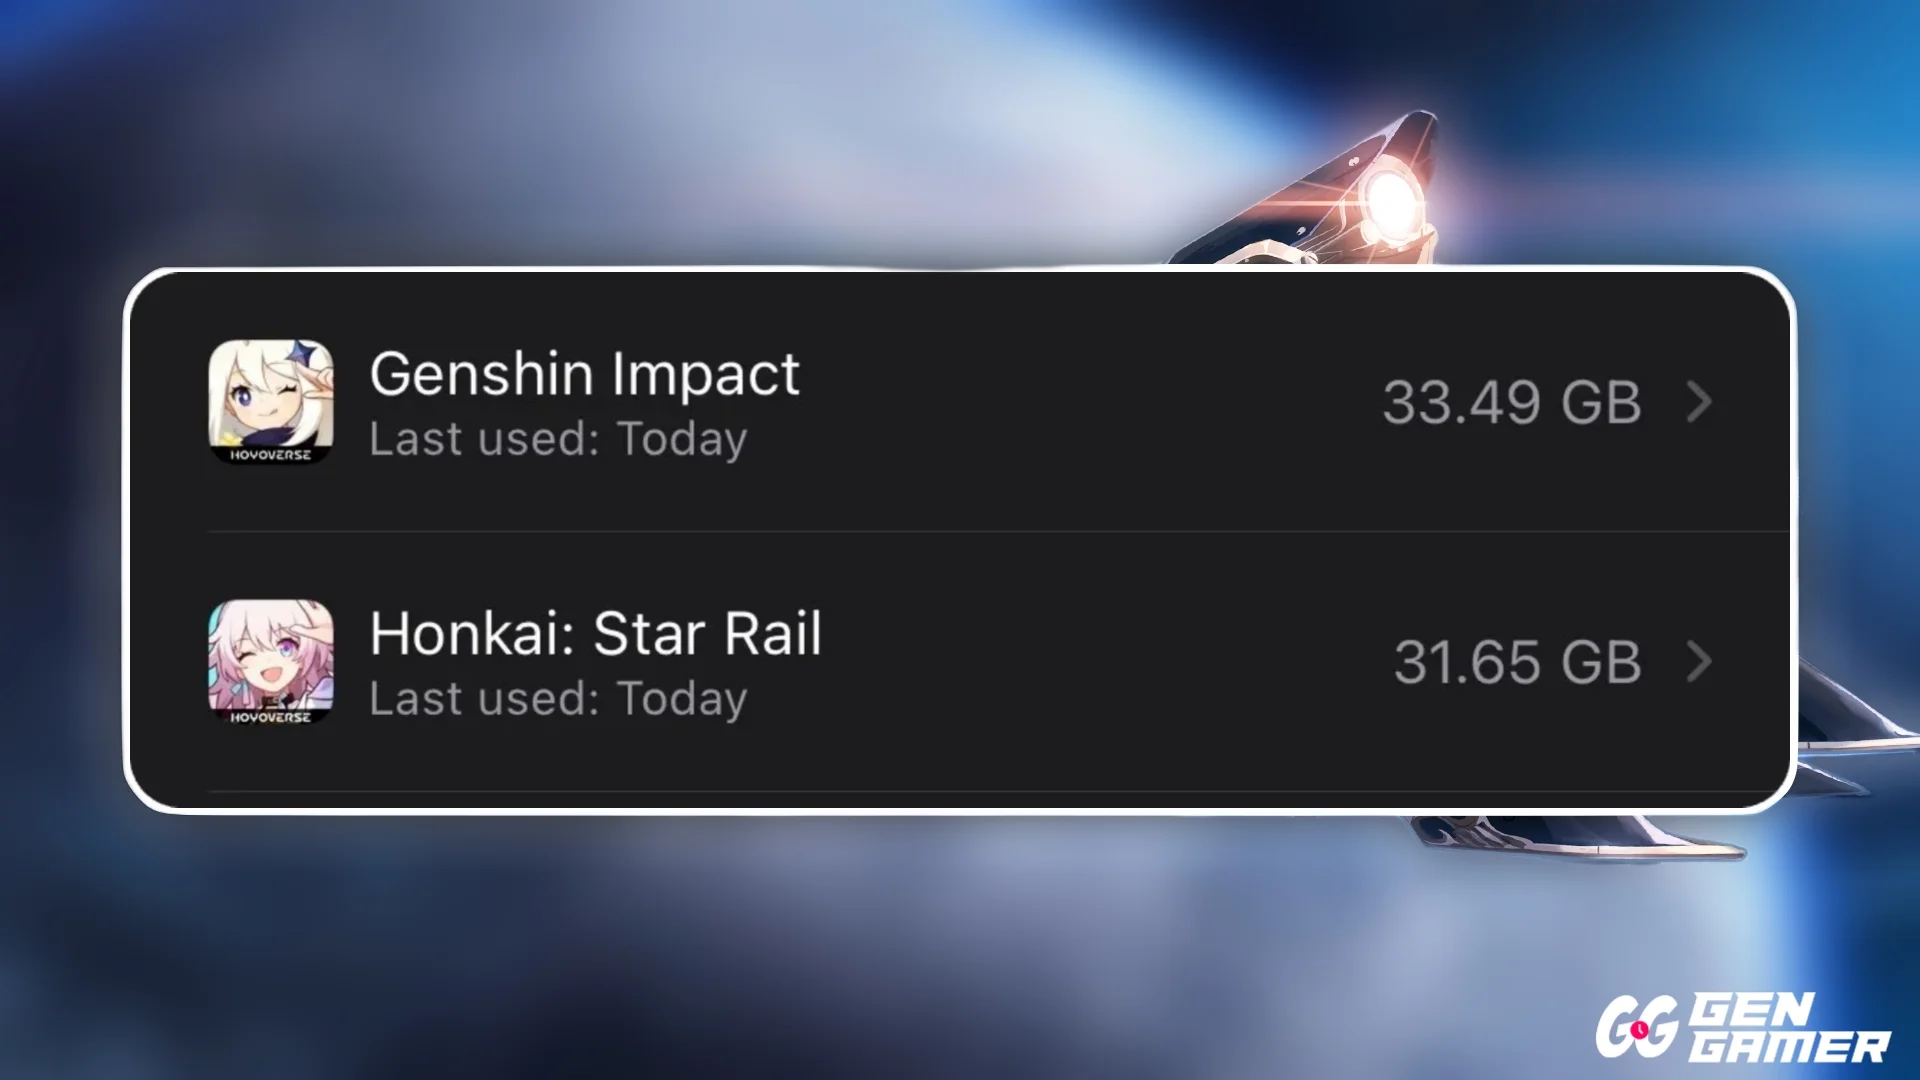 Players are comparing Honkai Star Rail and Genshin Impact for Big Size